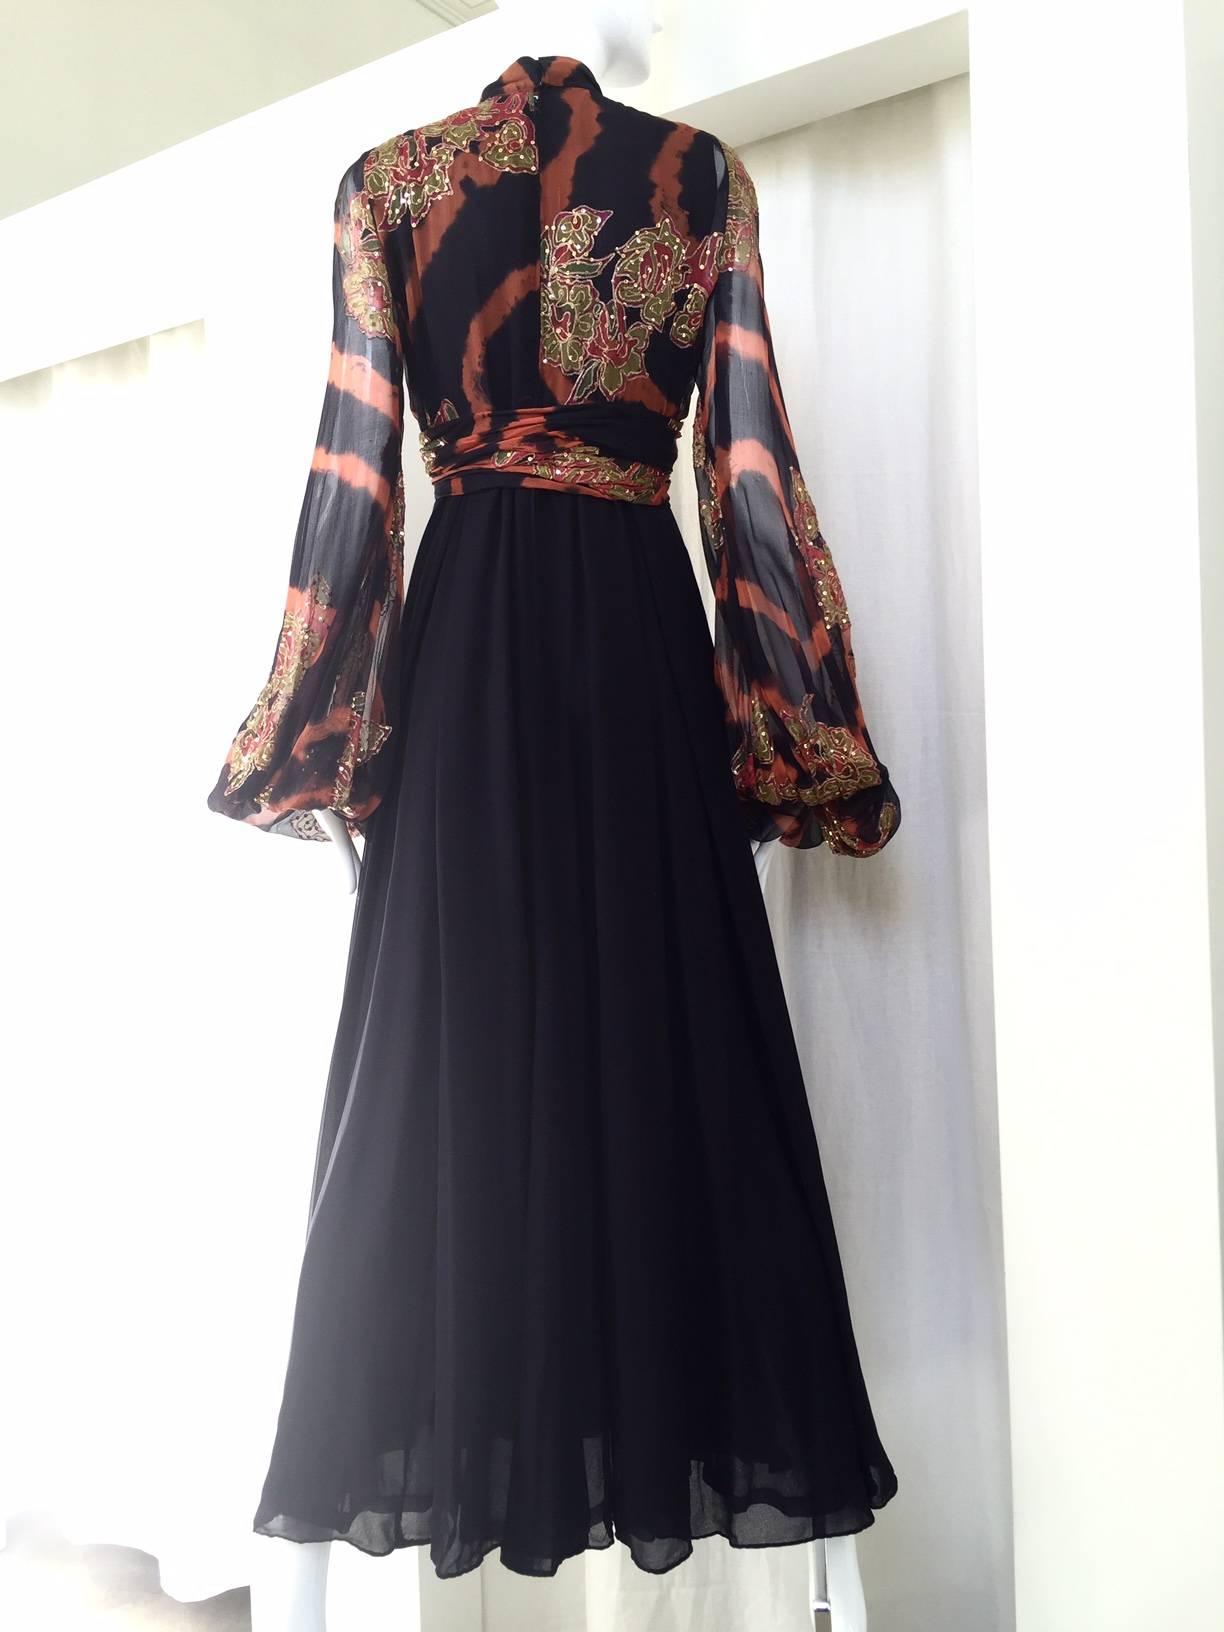 1970s CARDINALI black and orange tie dye bohemian  silk chiffon gown highlighted with gold stitching  and sequins with voluminous sleeve. mock neck. very long sleeve.
Size: 2/4  SMALL
Measurement
Bust: 34"
Waist: 27"
Length from shoulder